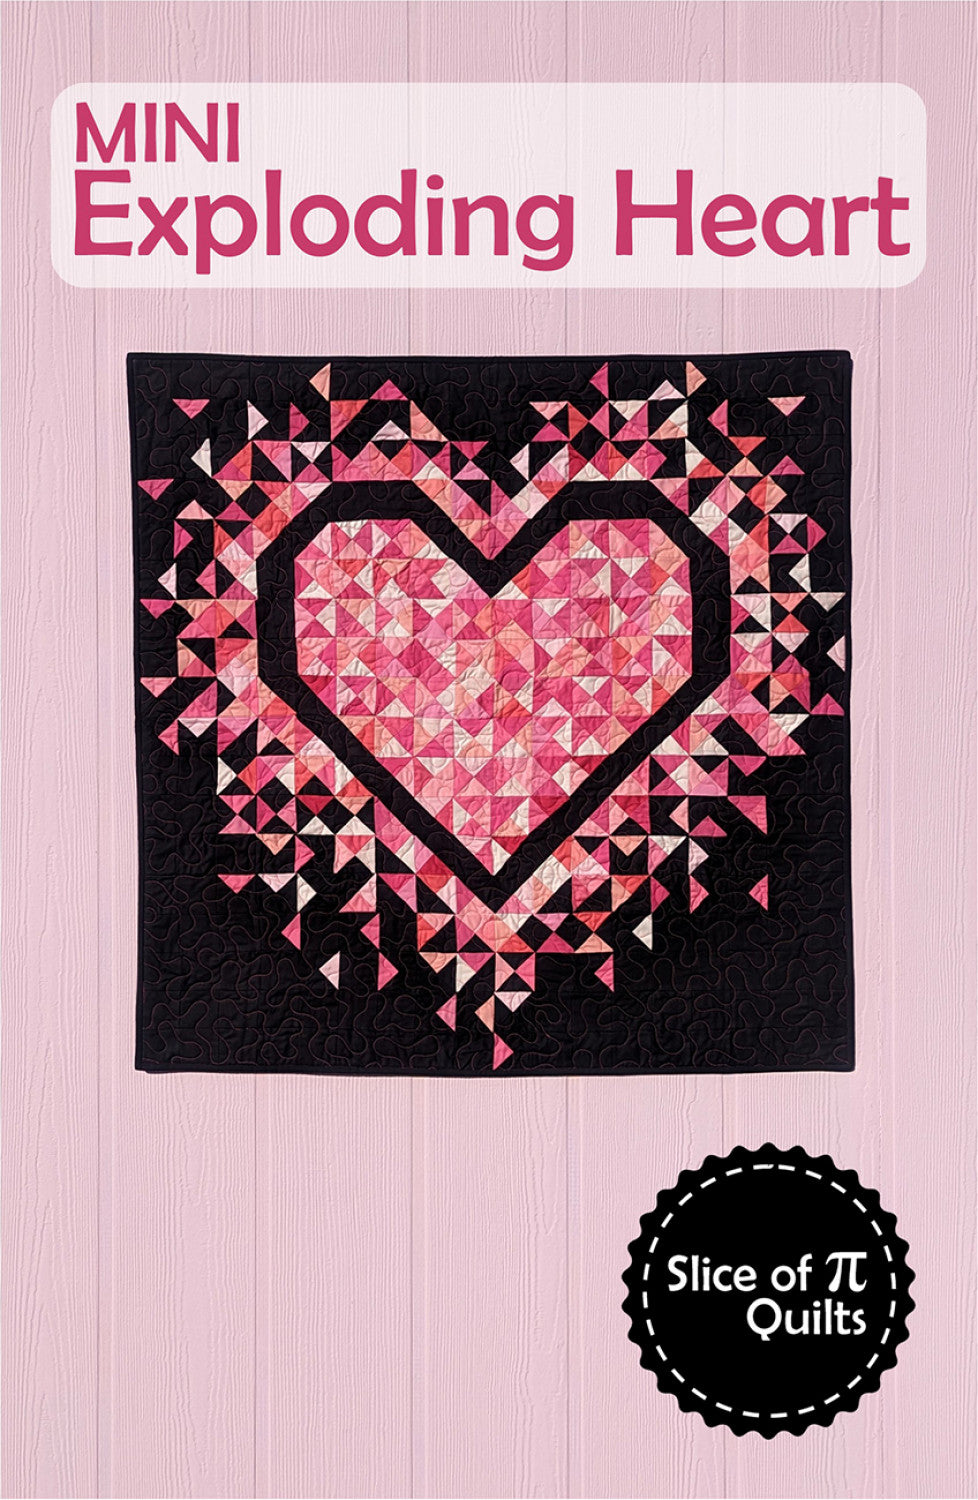 Mini Exploding Heart Quilt Pattern by Laura Piland for Slice of Pi Quilts